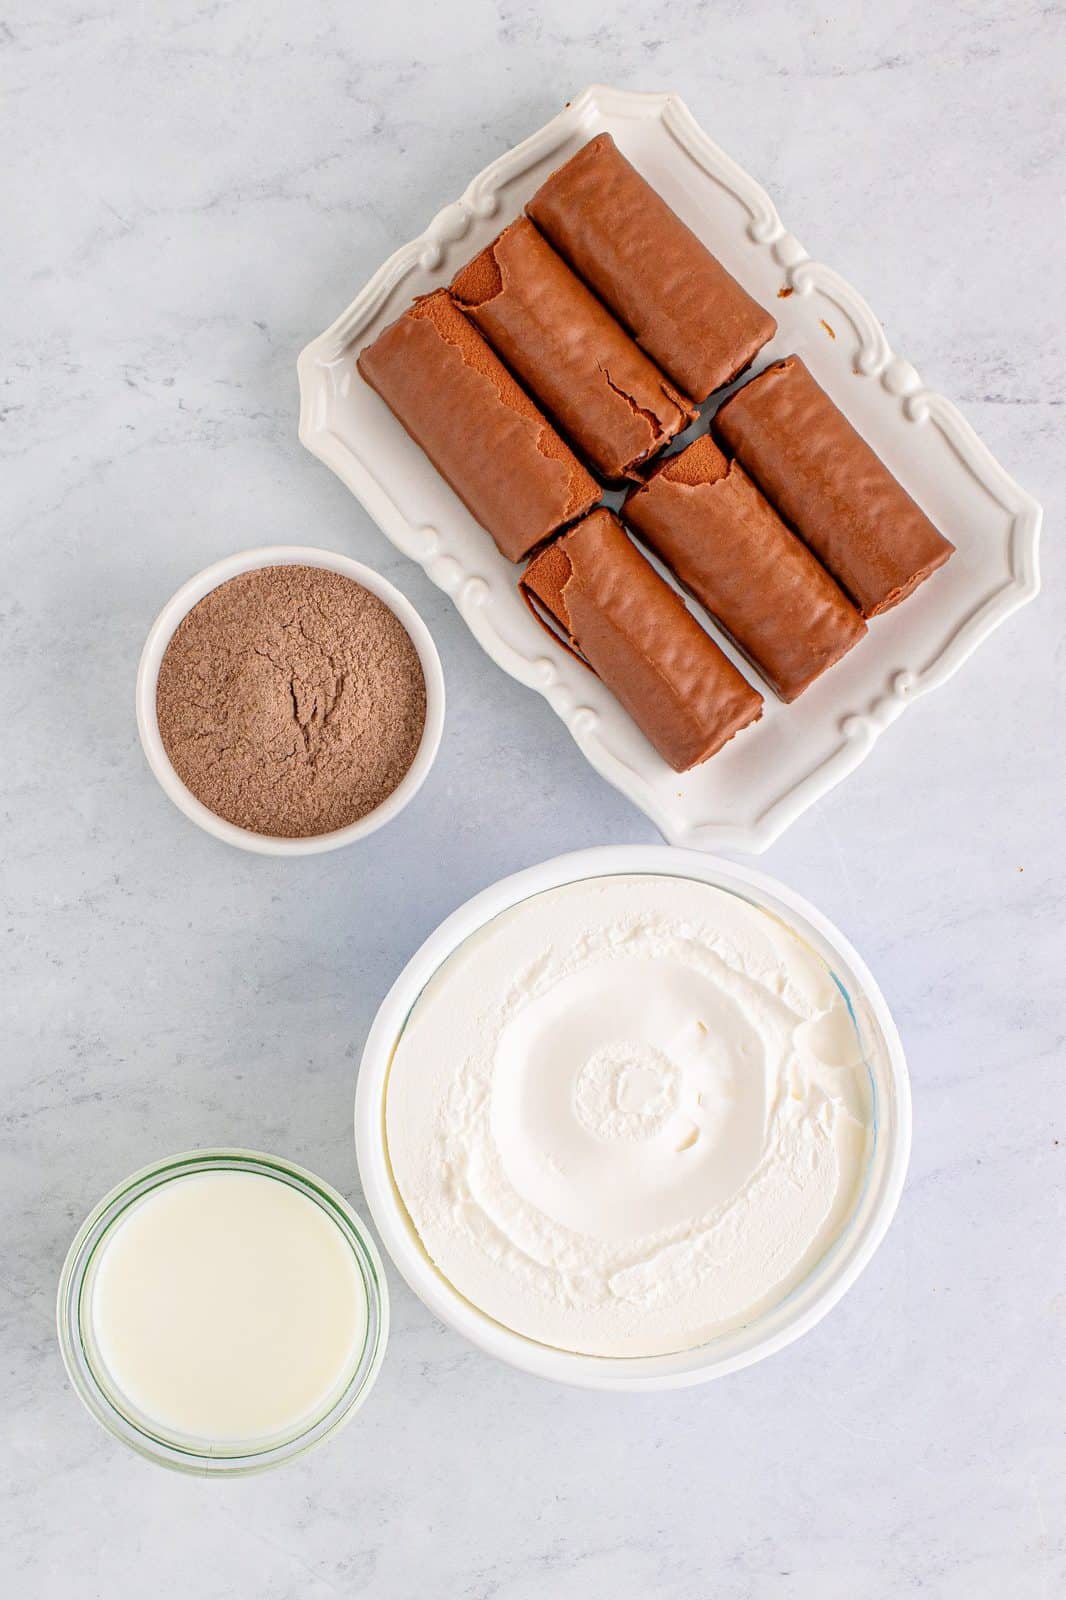 Ingredients needed: instant chocolate pudding mix, whole milk, cool whip and swiss cake rolls.